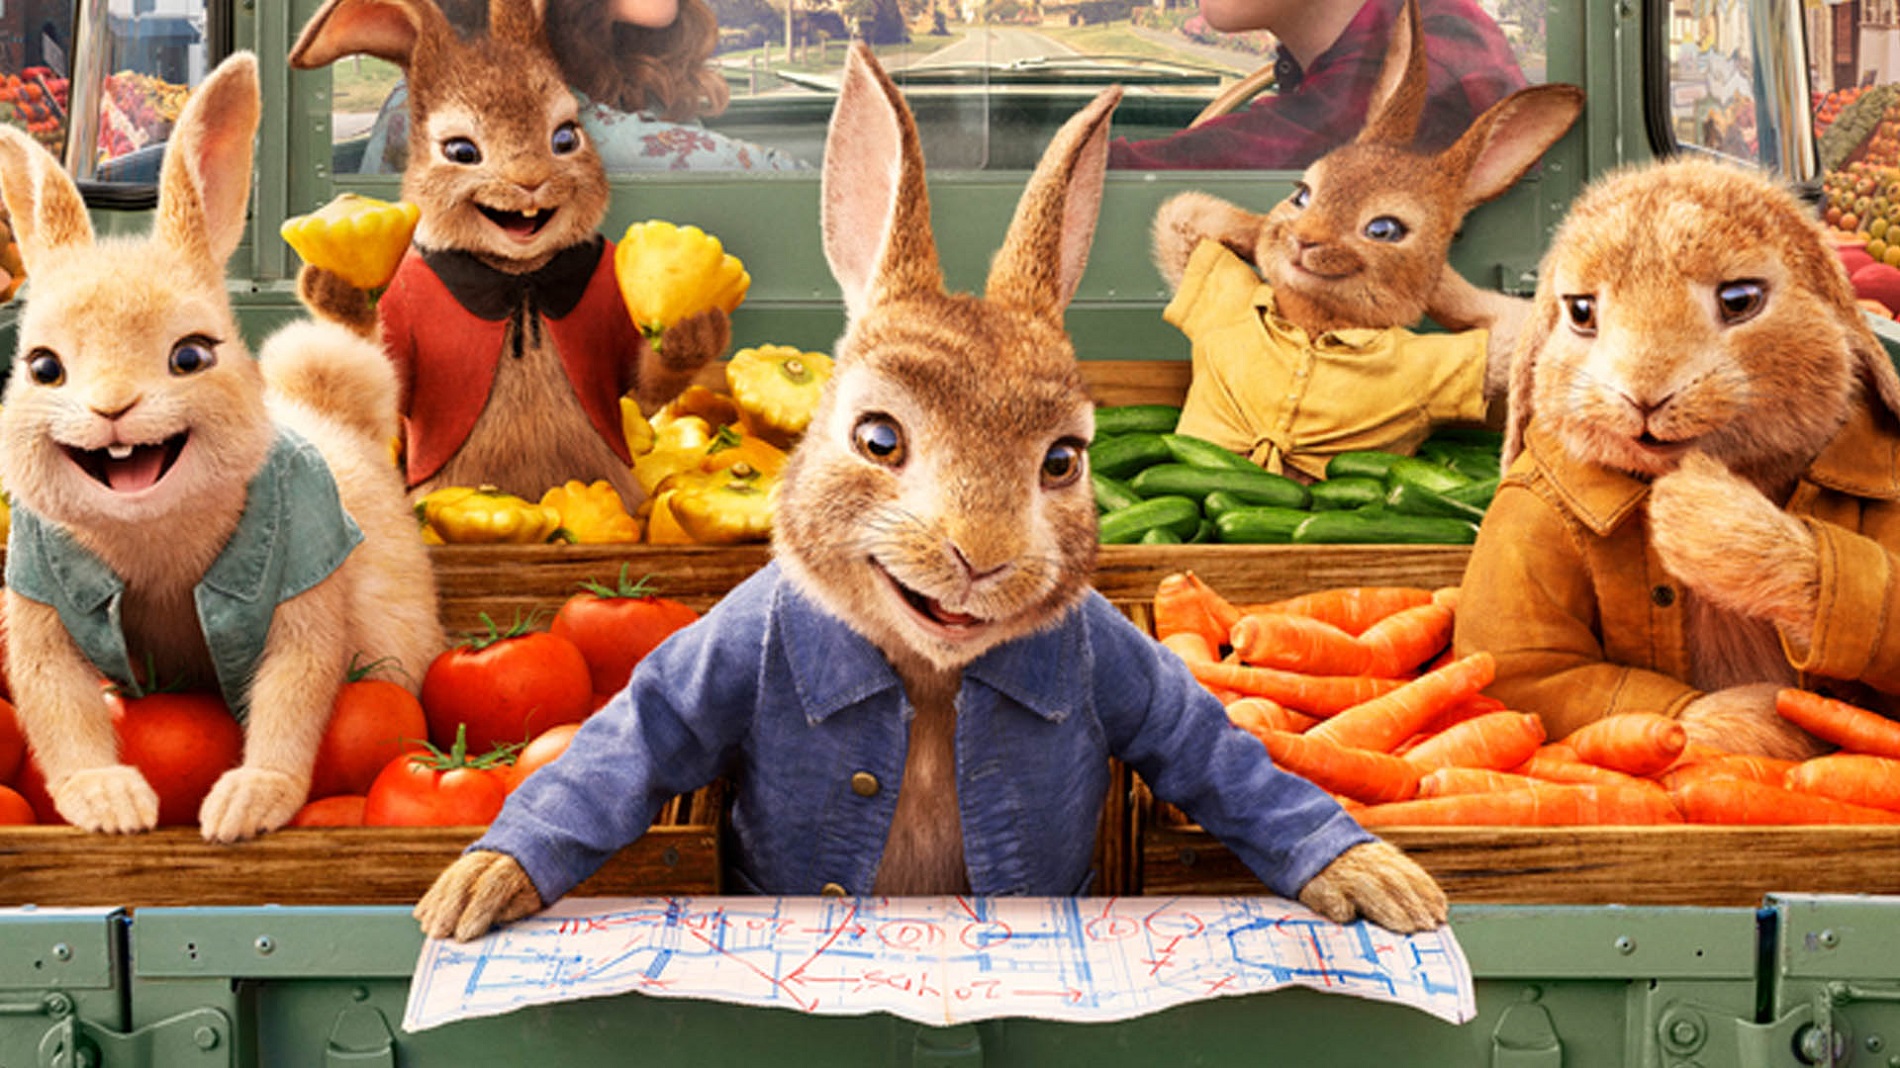 Peter Rabbit 2': Will the Delayed Movie Get an Early Streaming Release?